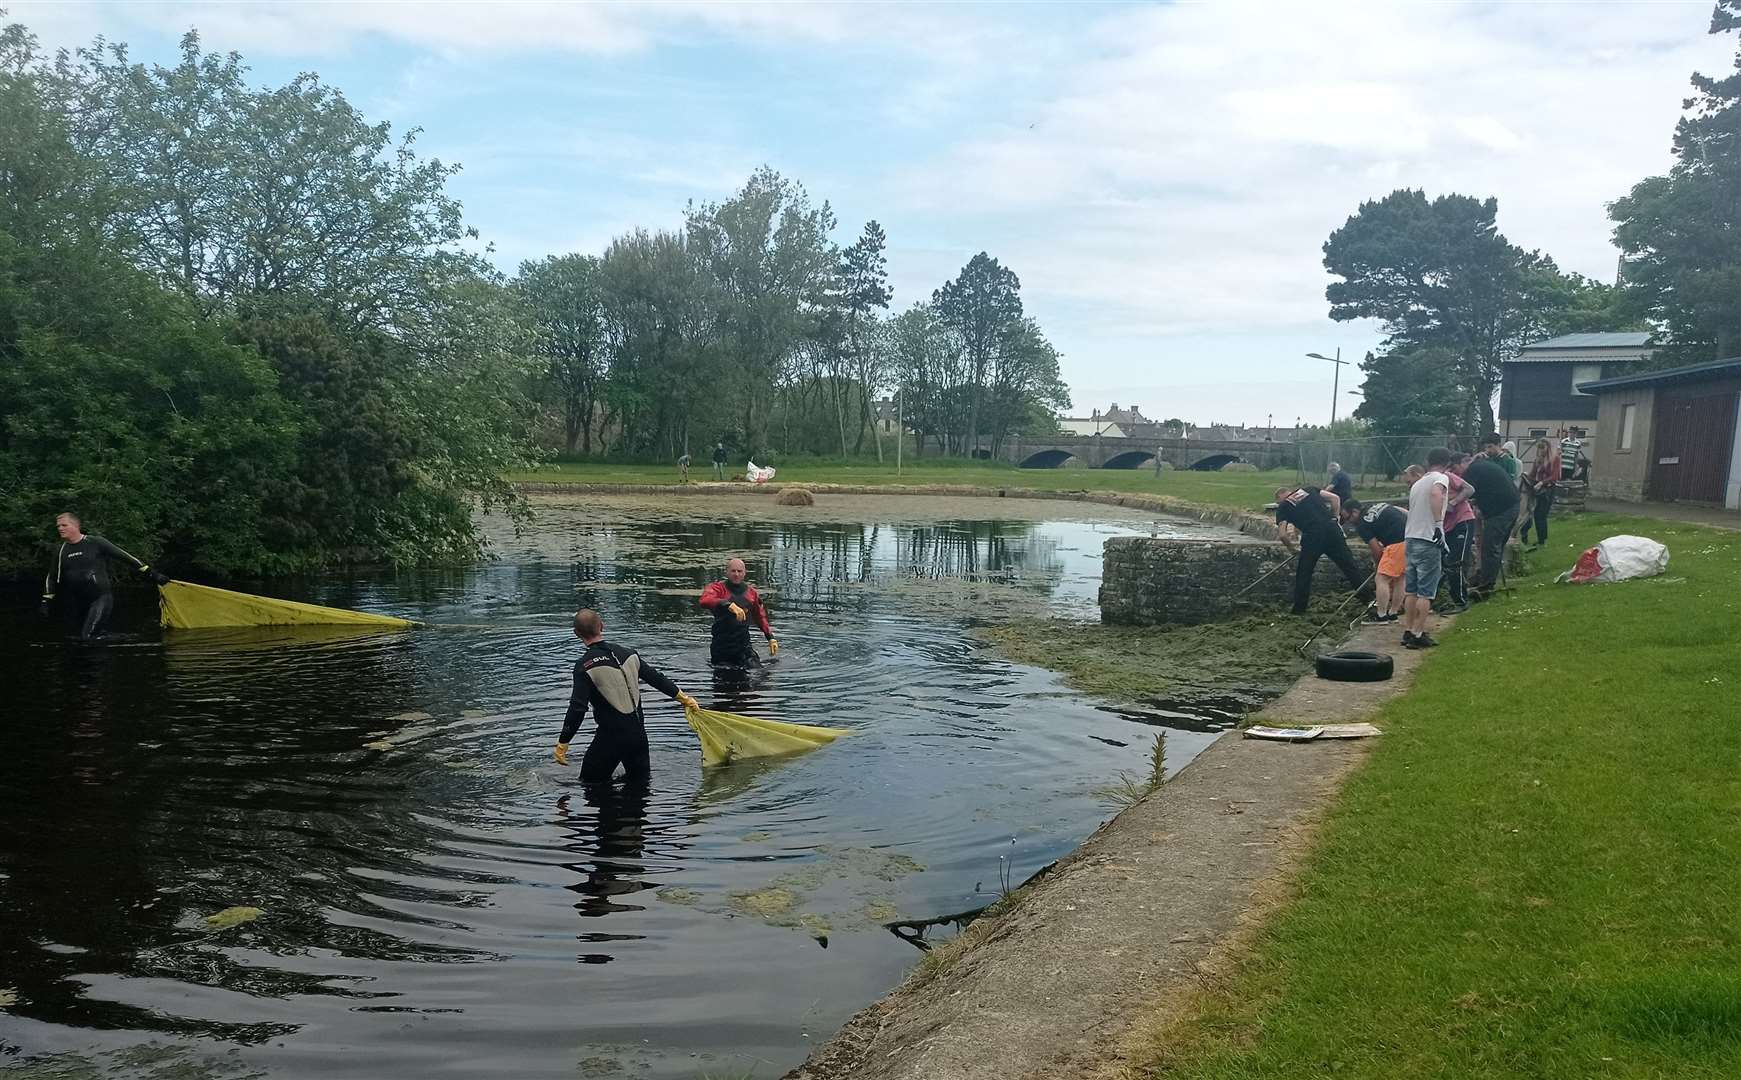 The clean-up effort in progress at Thurso's boating pond after Iain Elder and his firefighter colleagues were joined by around 30 local volunteers. Picture: Ron Gunn